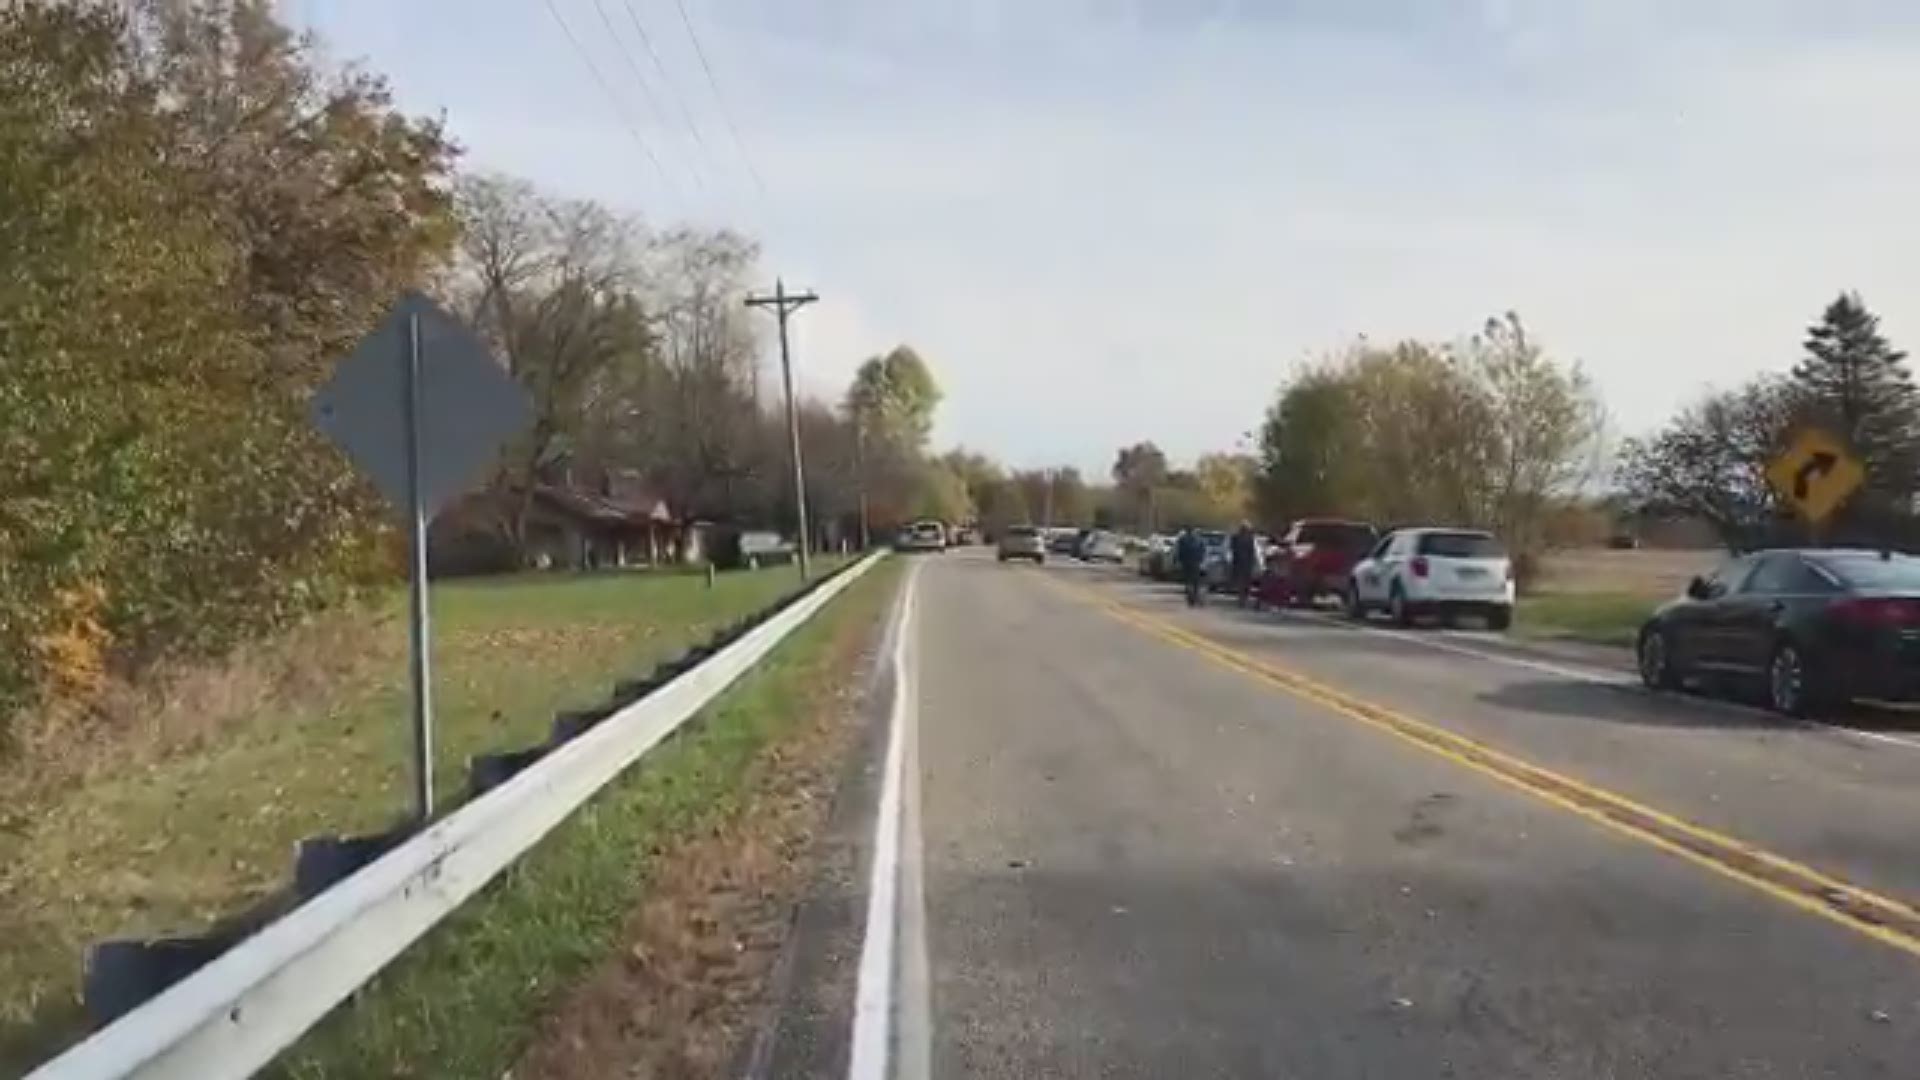 IndyStar Reporter Vic Ryckaert reports from the scene where a pickup truck struck and killed three kids getting on their school bus in northern Indiana. Vic Ryckaert, vic.ryckaert@indystar.com